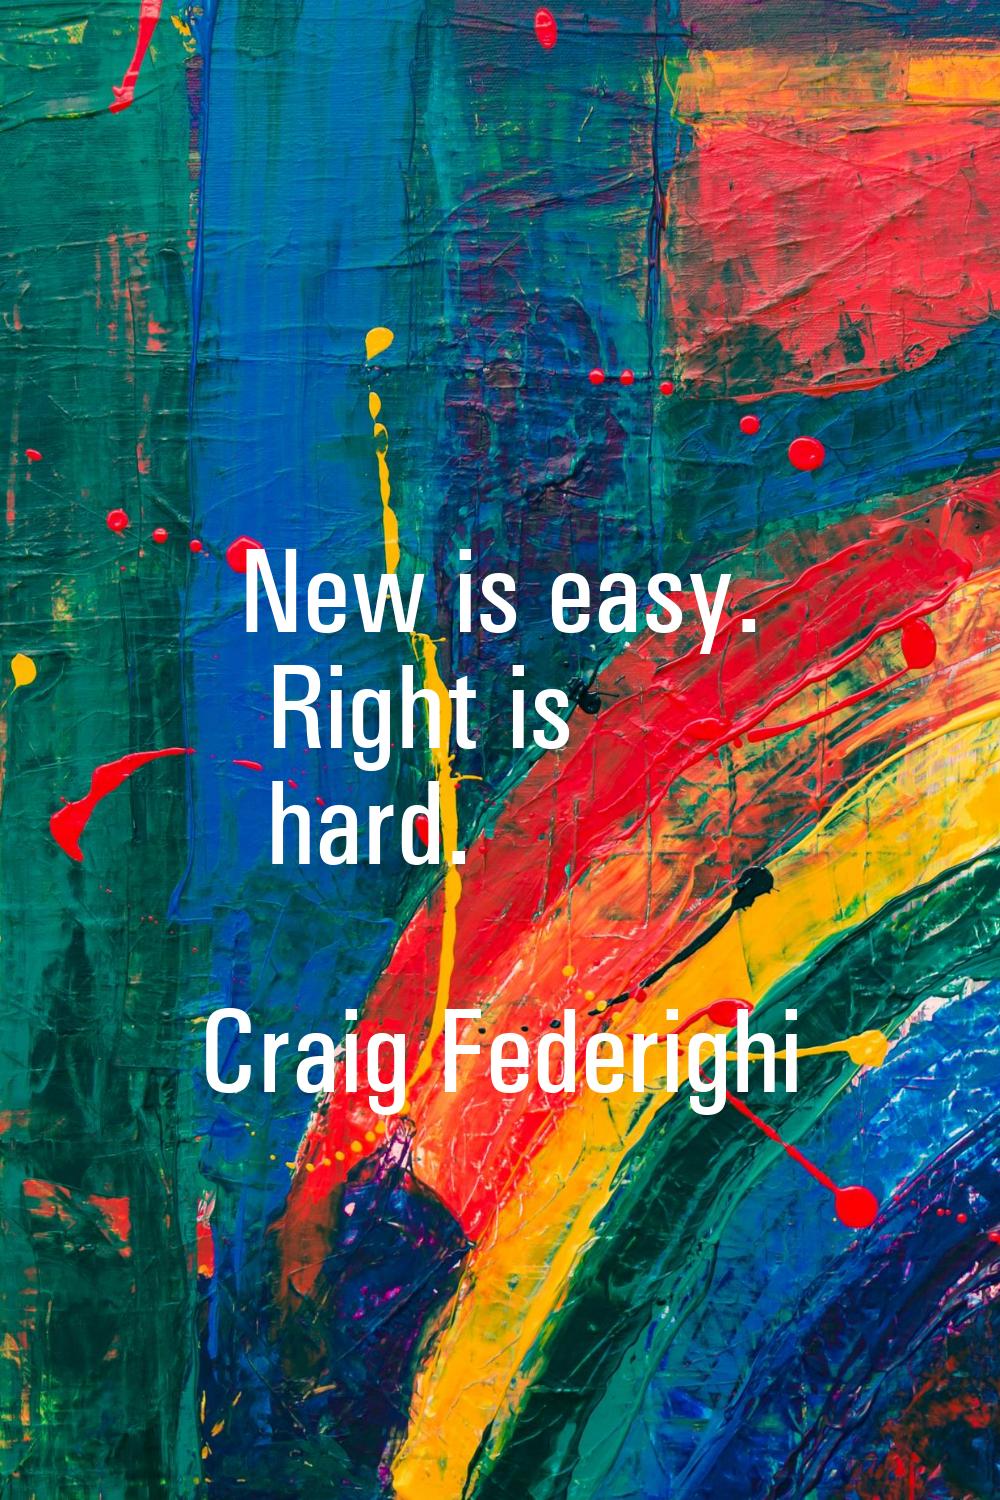 New is easy. Right is hard.